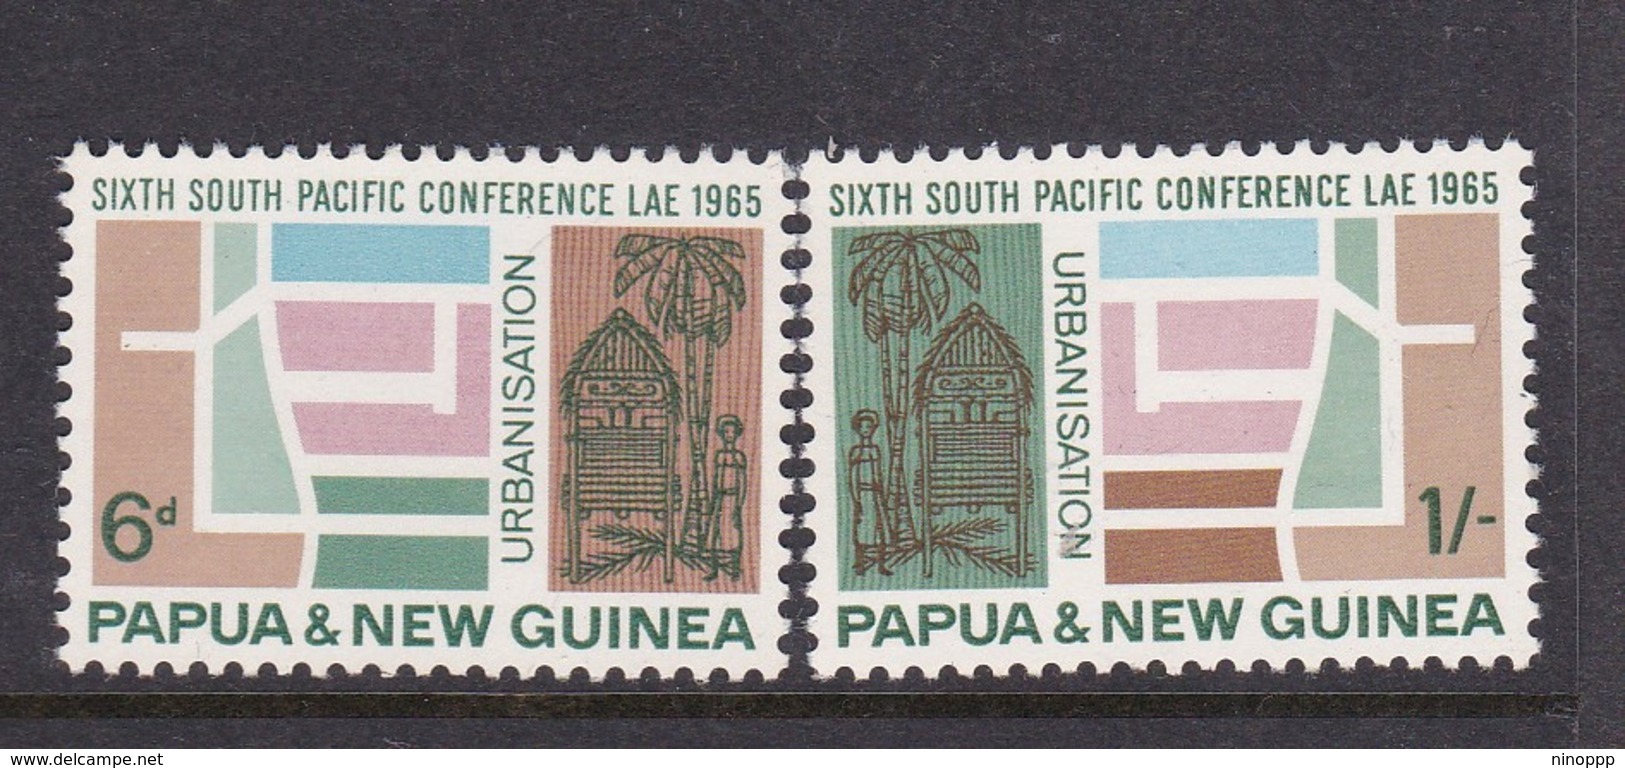 Papua New Guinea SG 77-78 1965 6th South Pacific Conference Mint Never Hinged Set - Papoea-Nieuw-Guinea